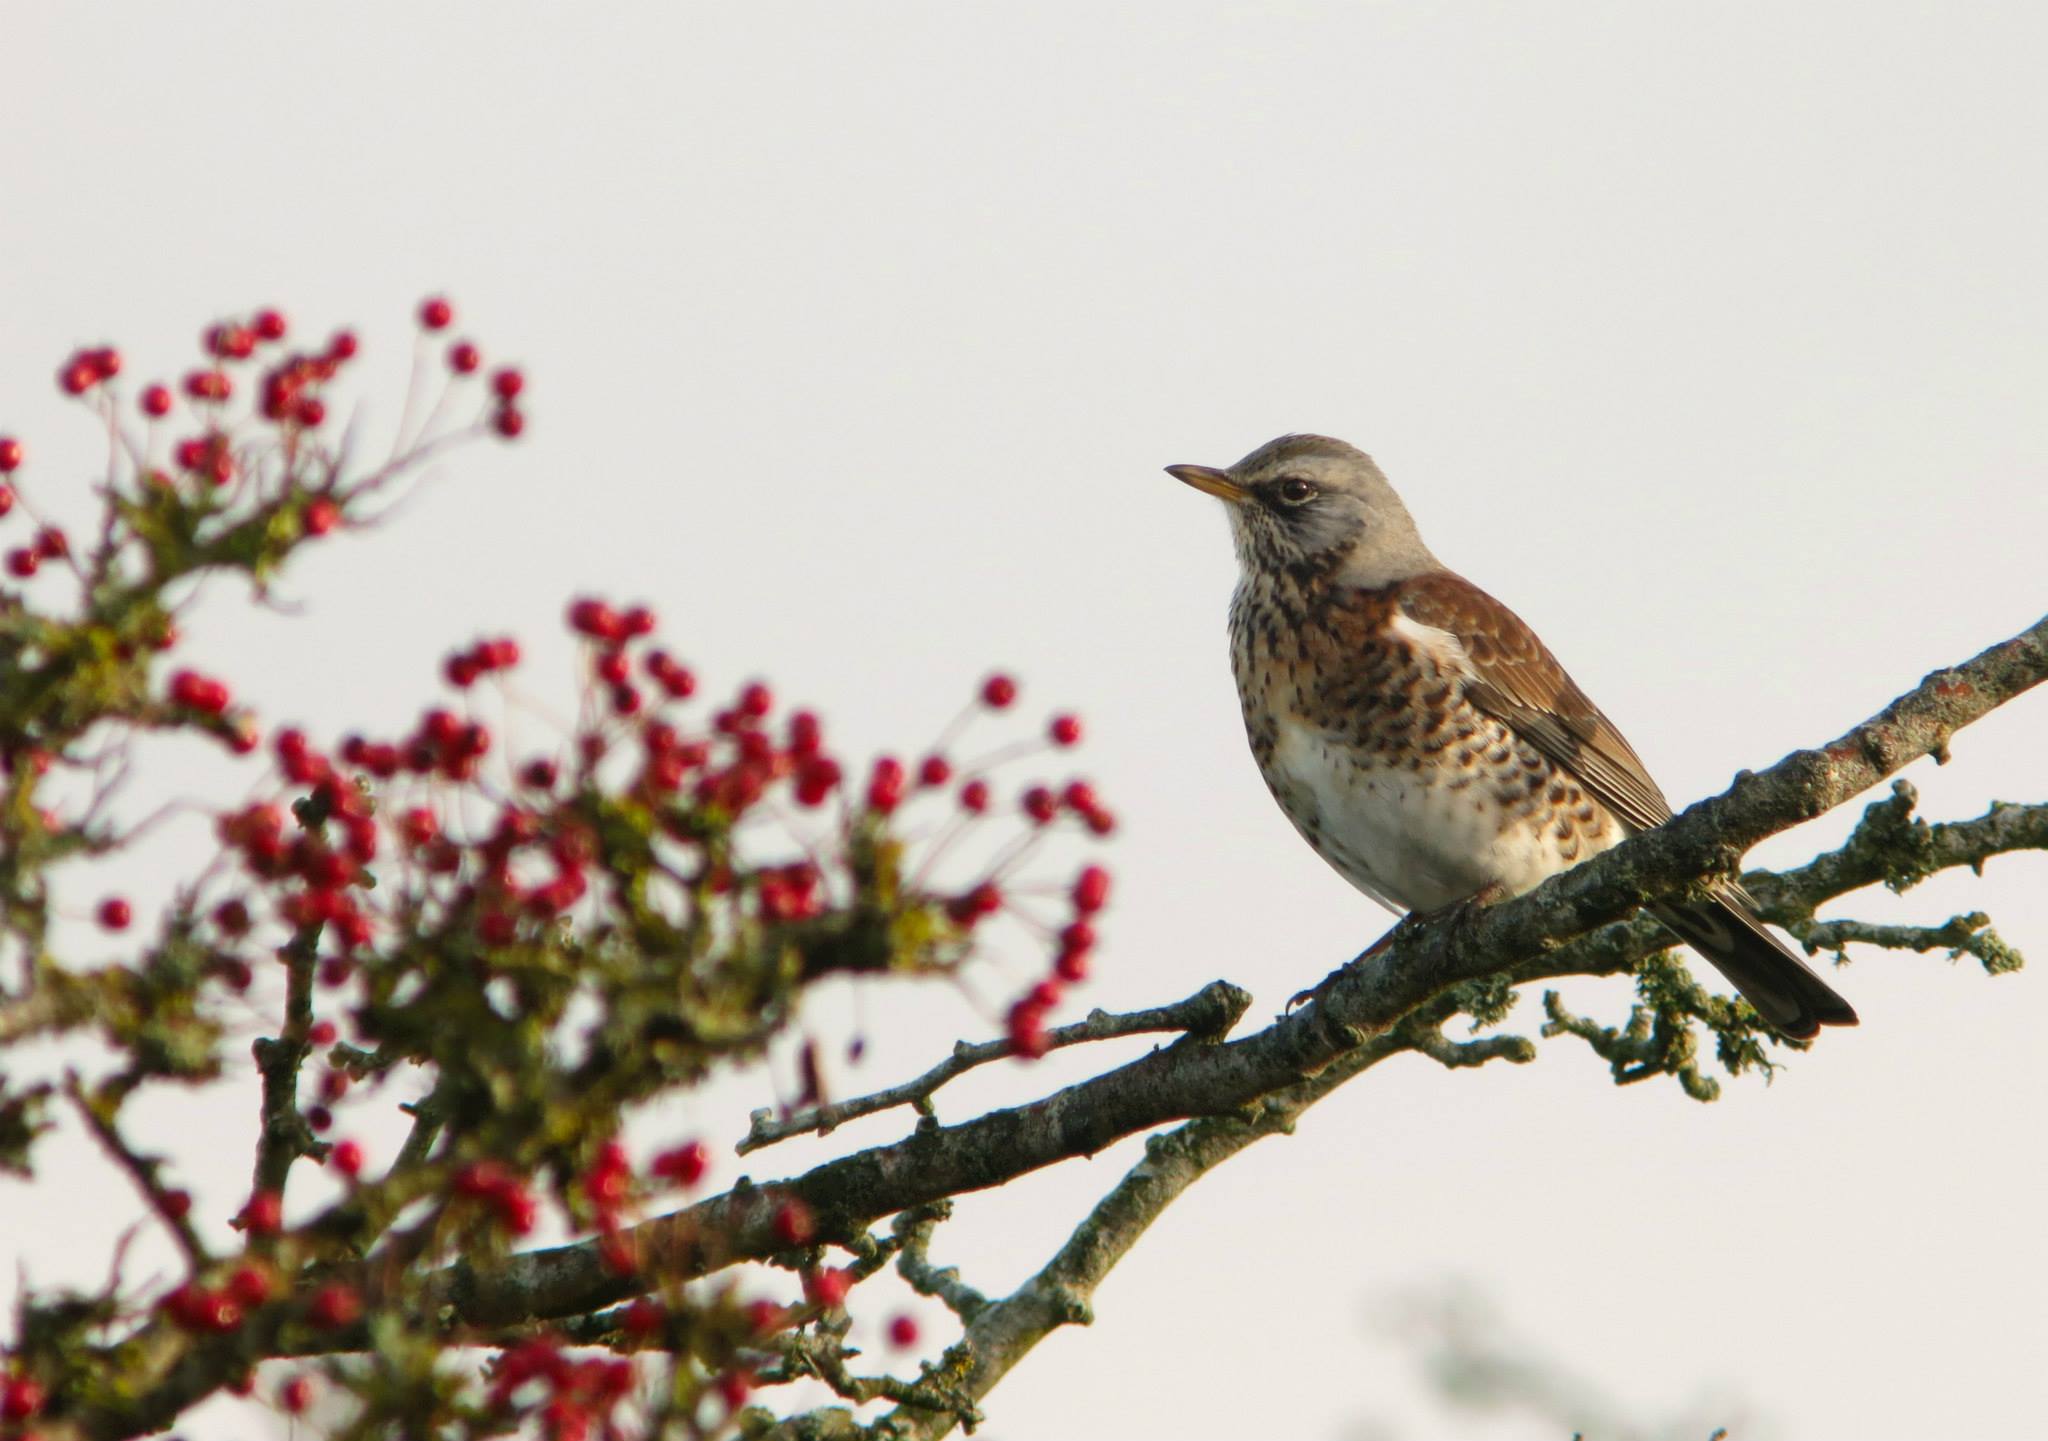 Fieldfares everywhere but our network issues continue